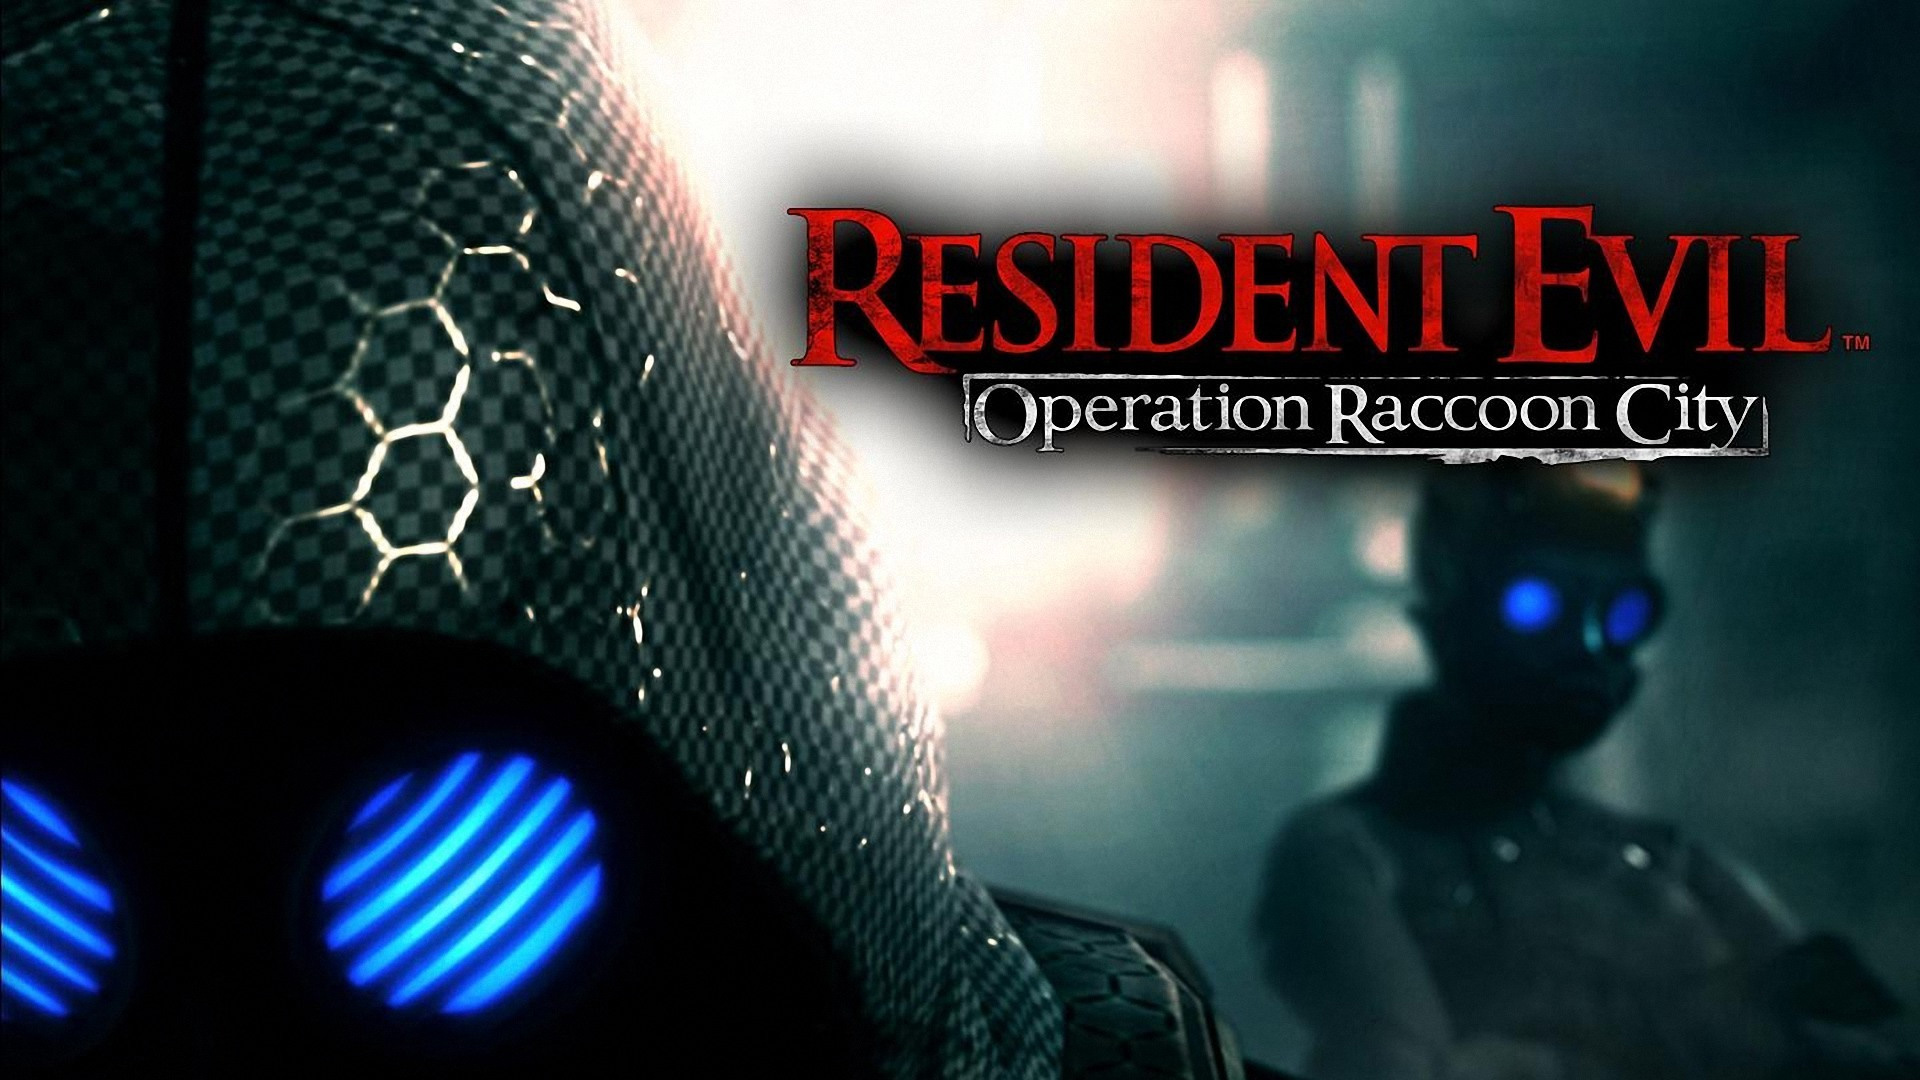 Video Game Resident Evil Operation Raccoon City 1920x1080